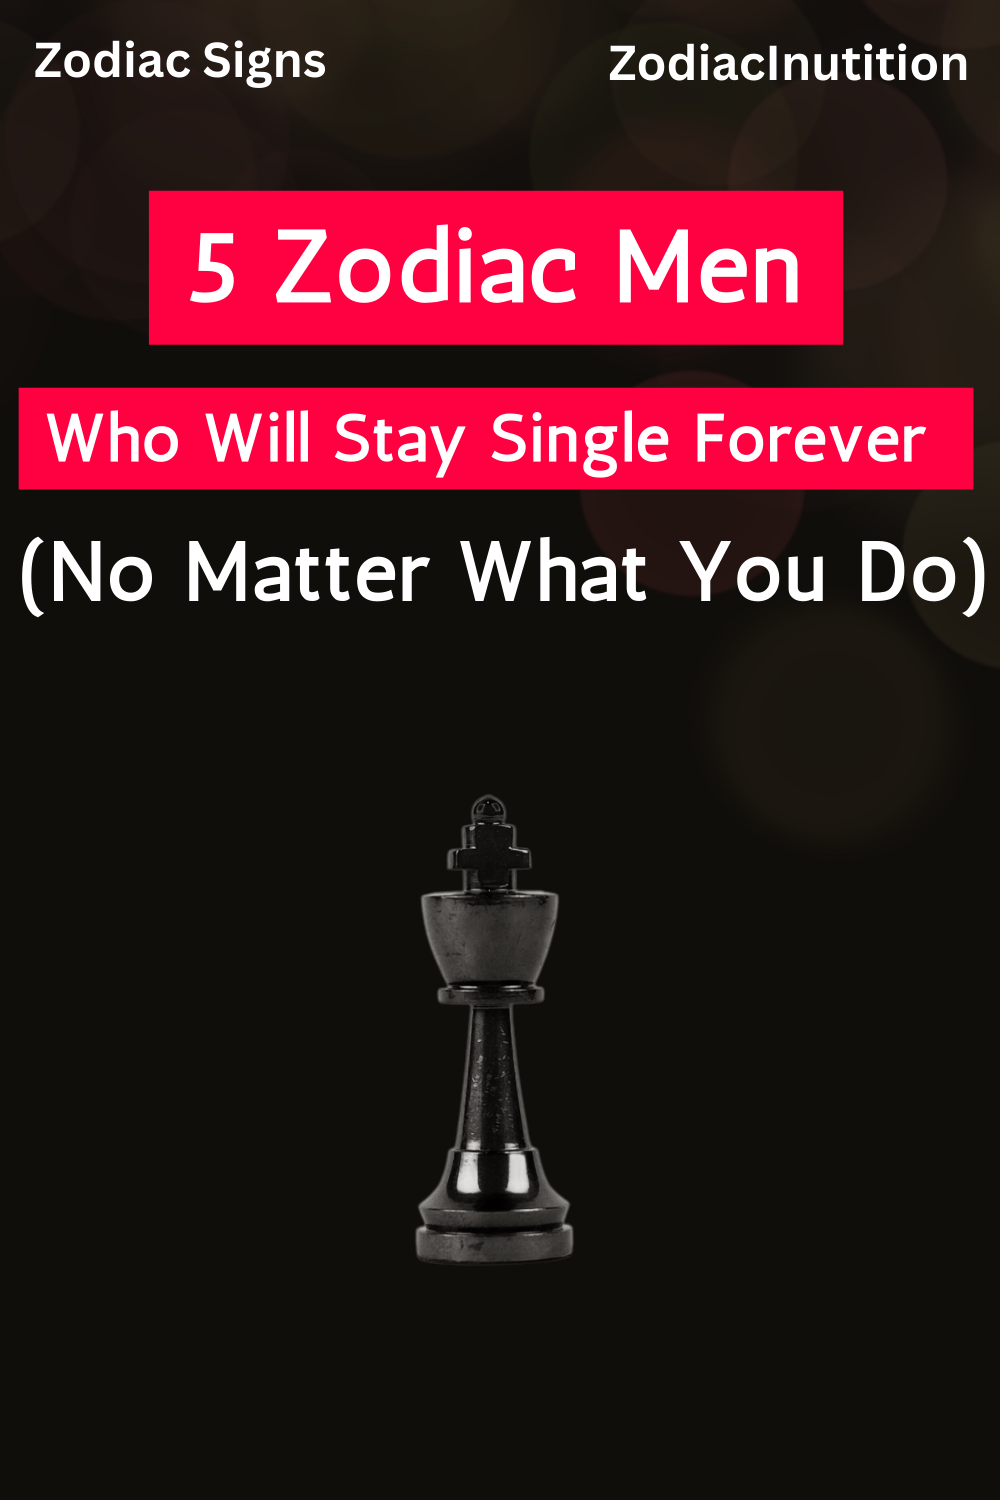 5 Zodiac Men Who Will Stay Single Forever (No Matter What You Do)